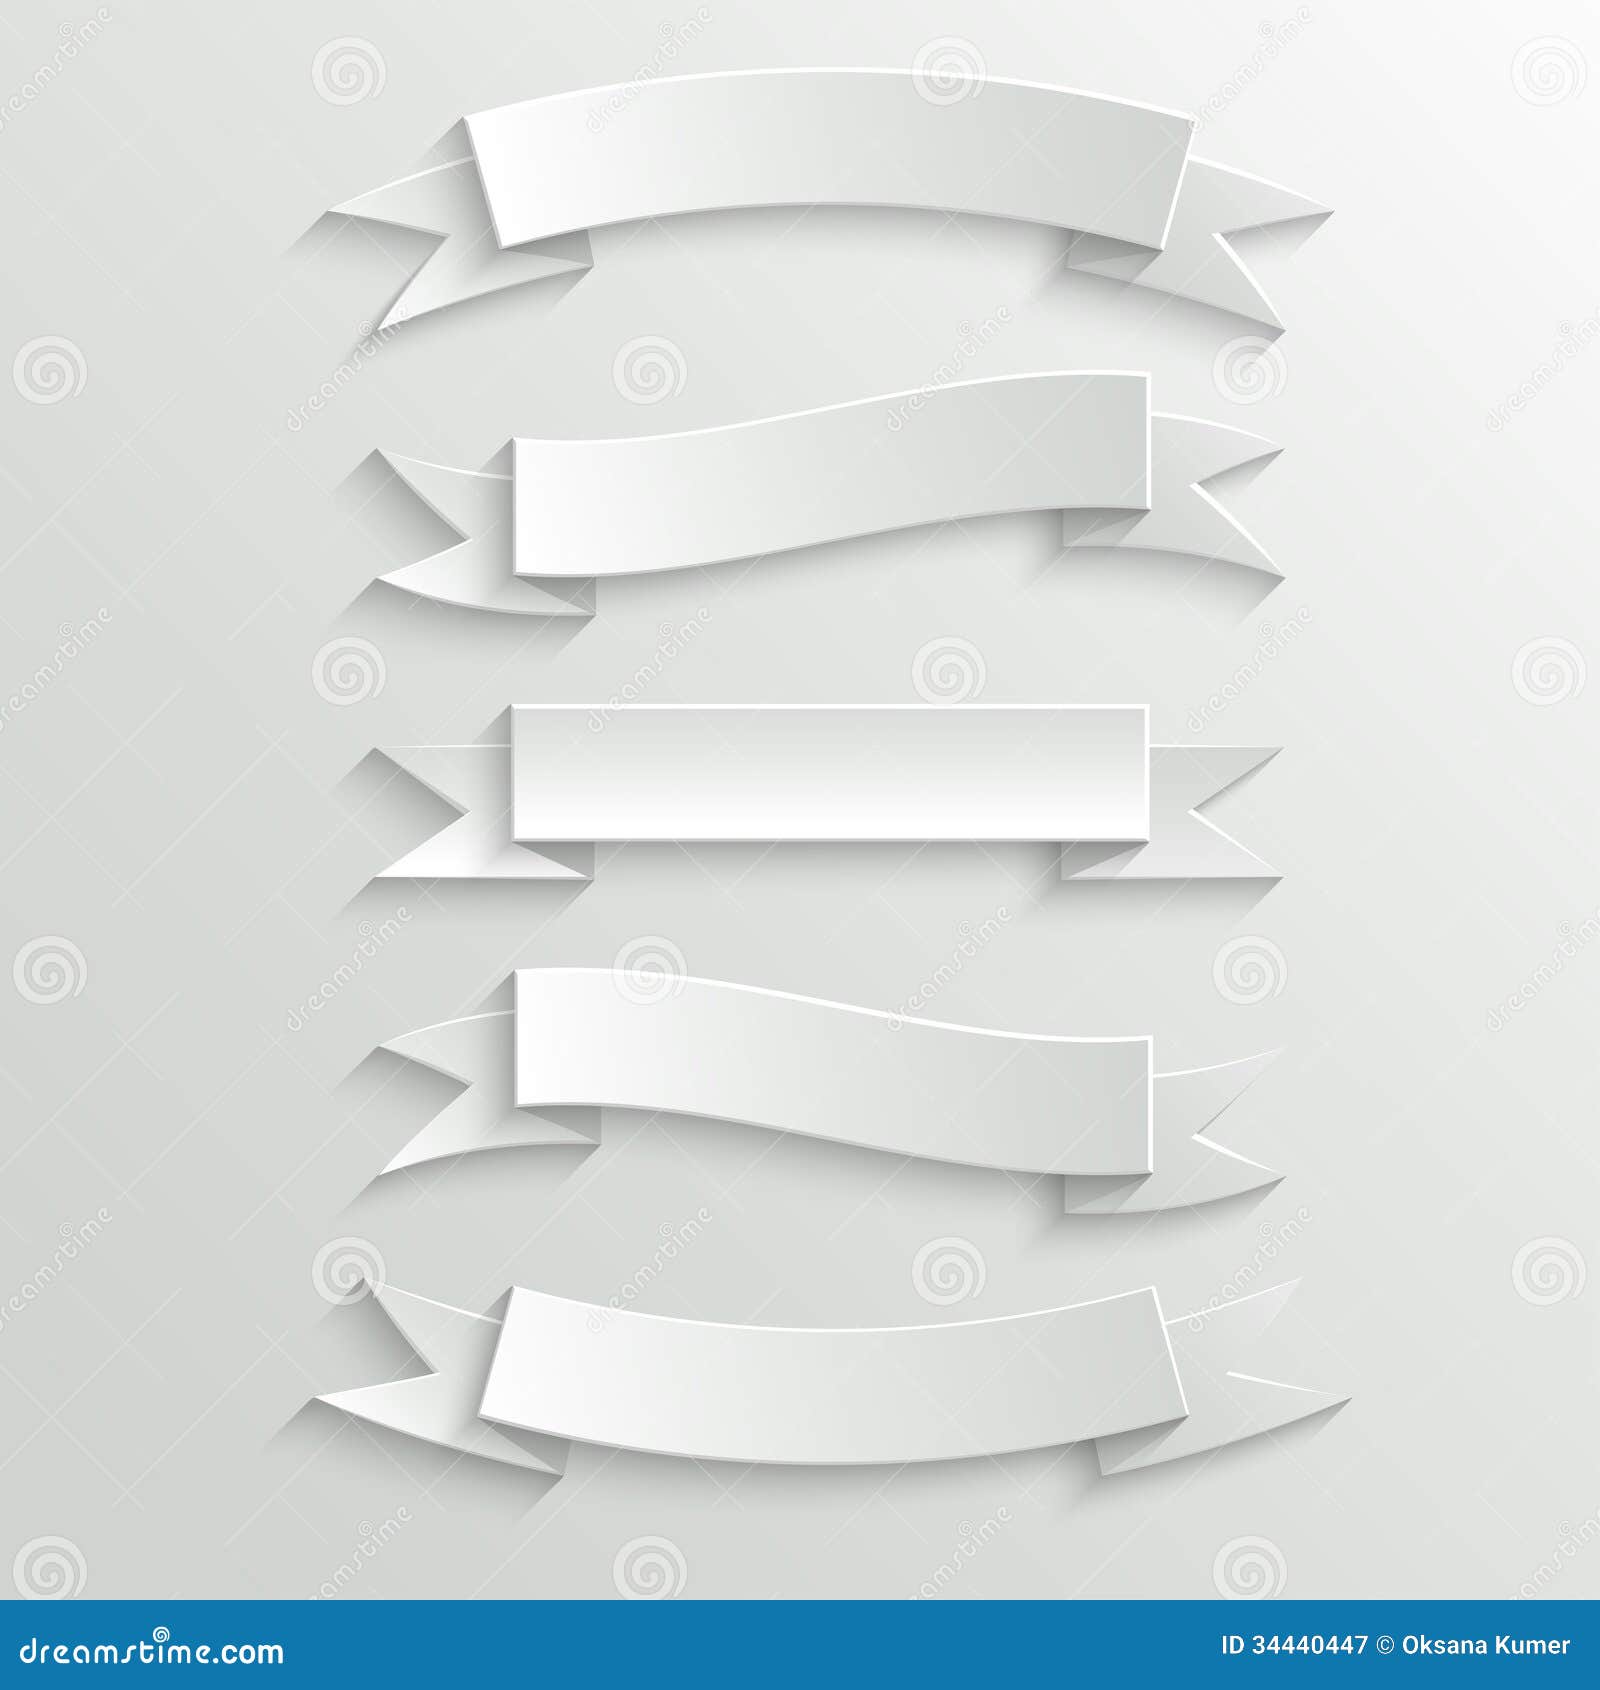 vector sticker award Banners Free Paper And Royalty White Stock Ribbons